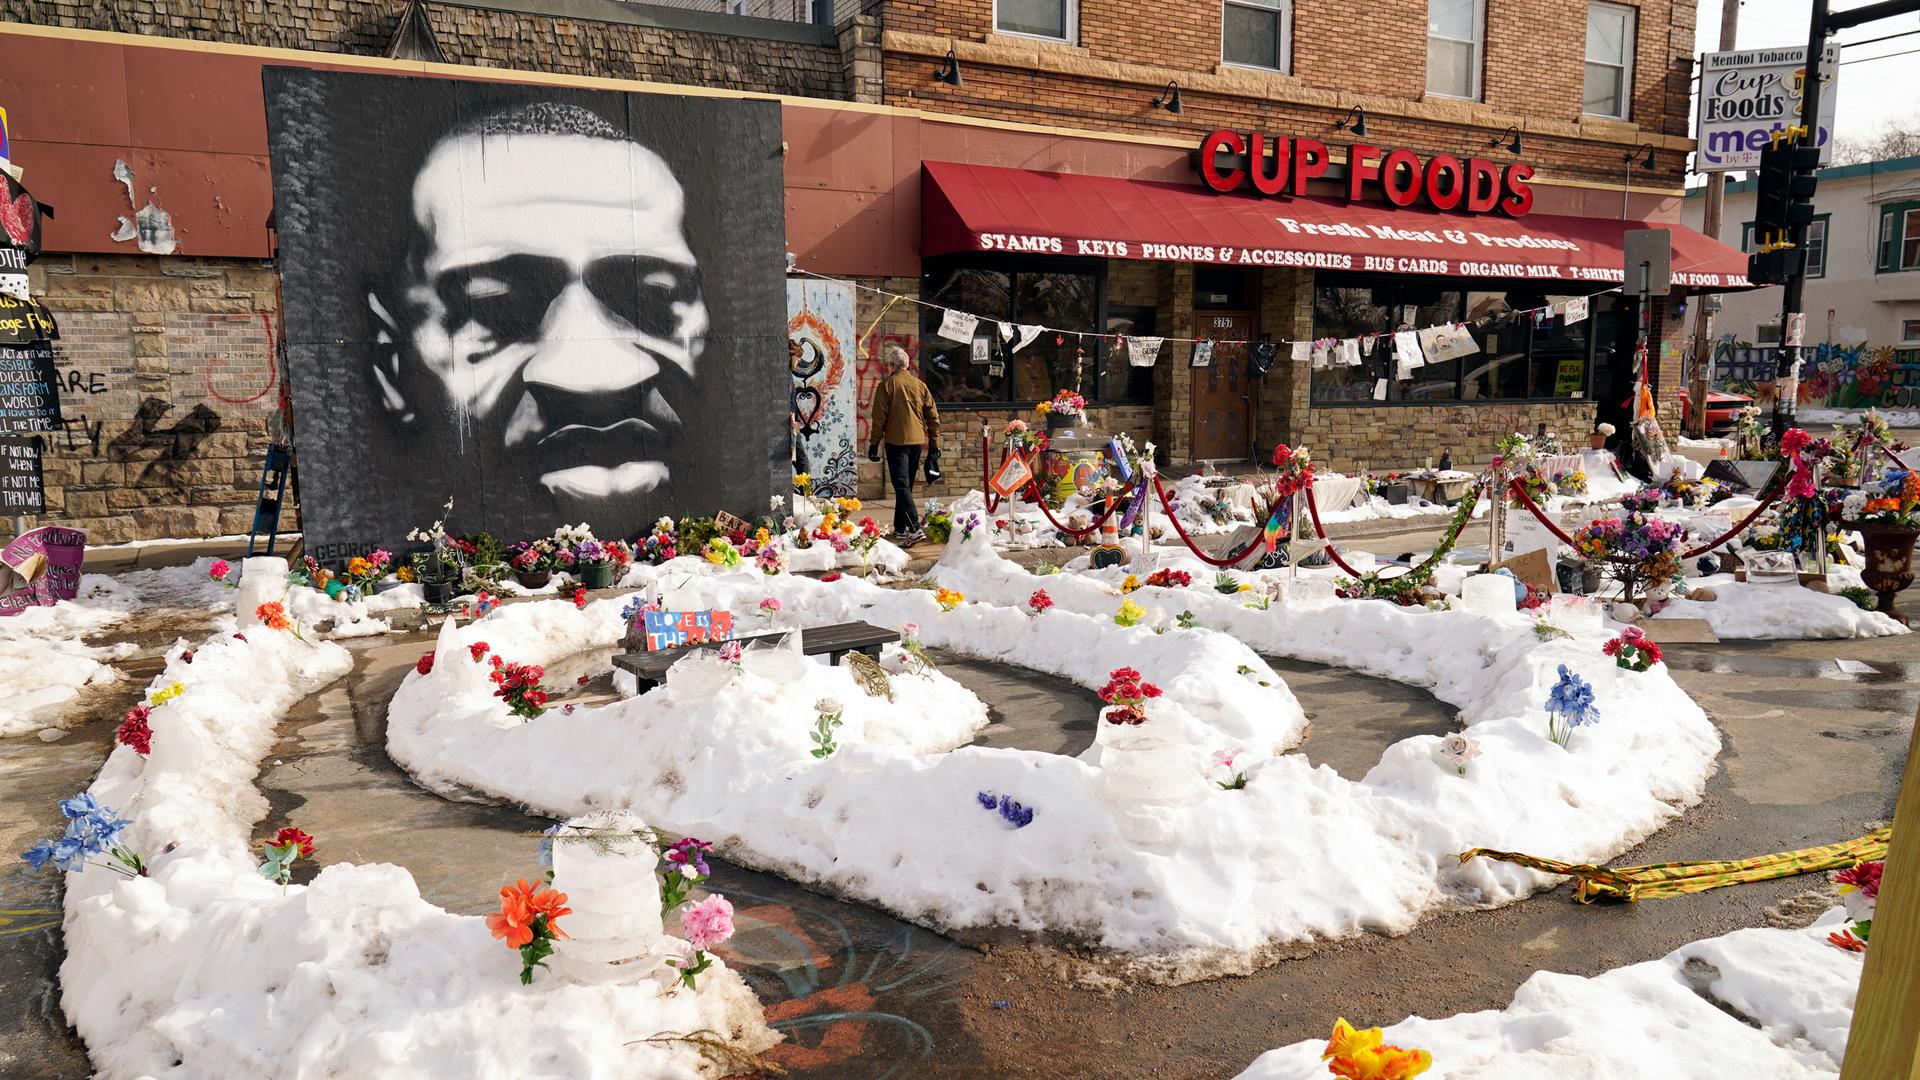 A large black and white portrait of George Floyd is shown afixed to the wall of a Cup Foods store with flowers placed in snow piles.